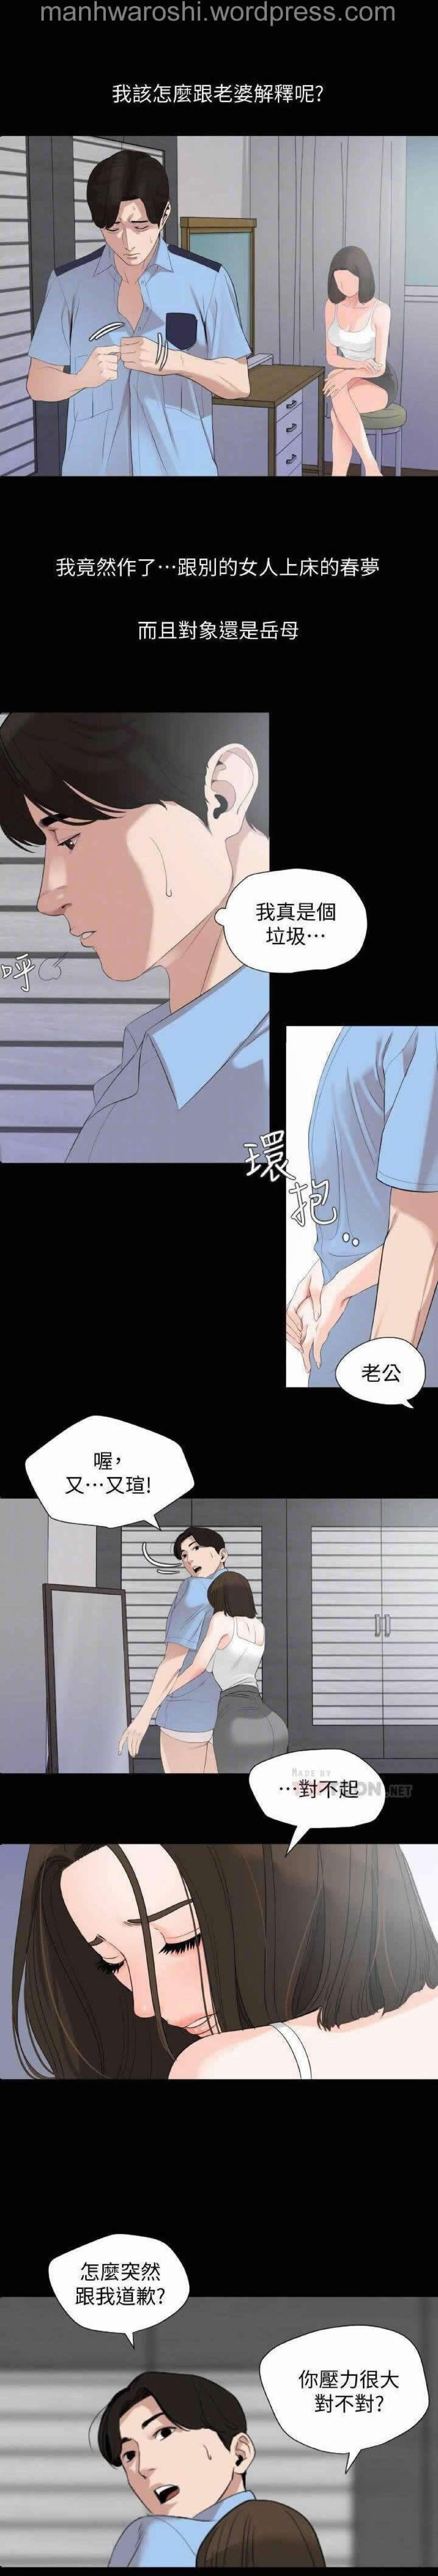 Don’t Be Like This! Son-In-Law | 与岳母同屋 第 7 [Chinese] Manhwa 